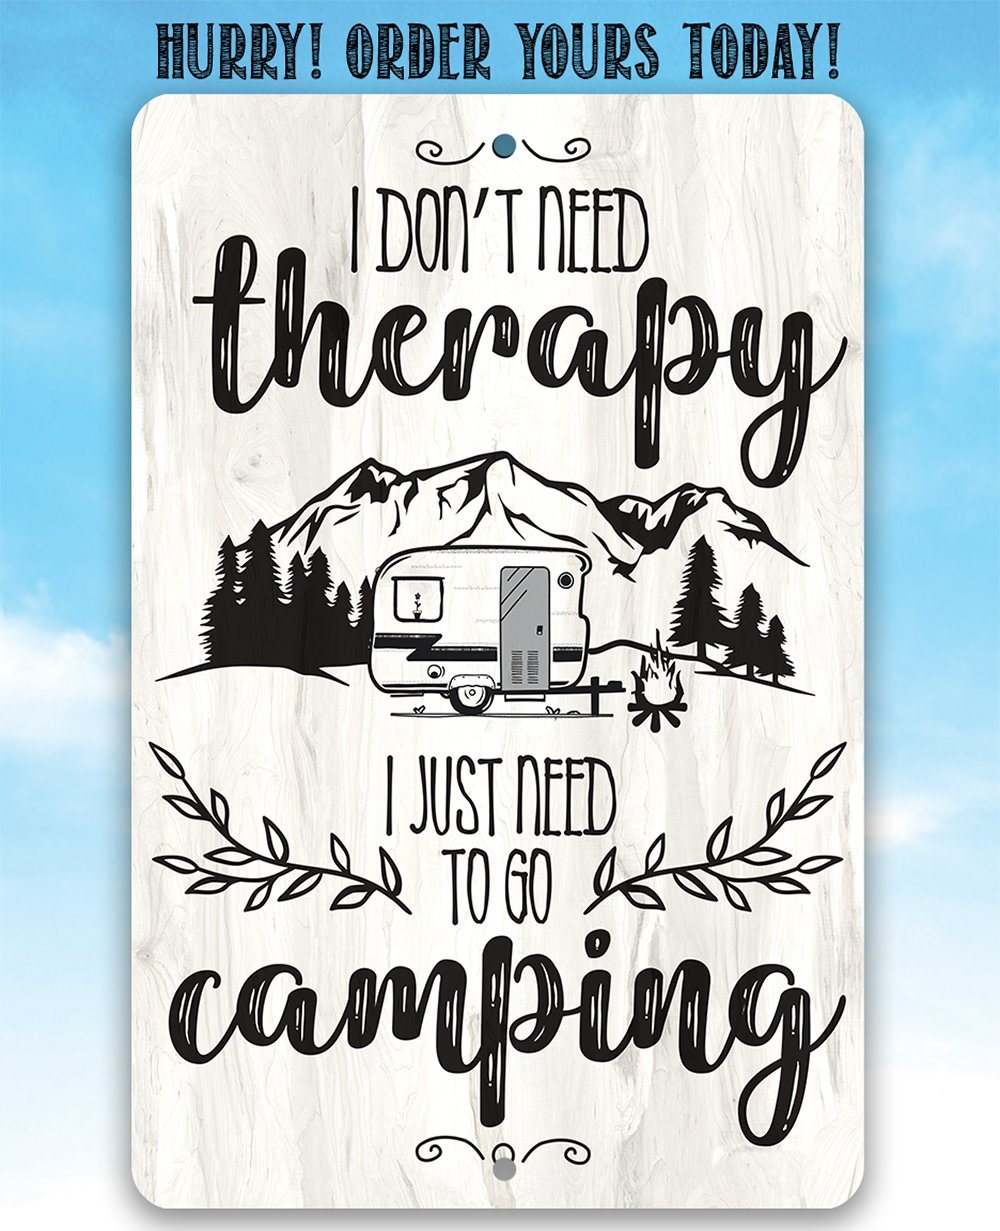 I Don't Need Therapy Camping - Metal Sign | Lone Star Art.